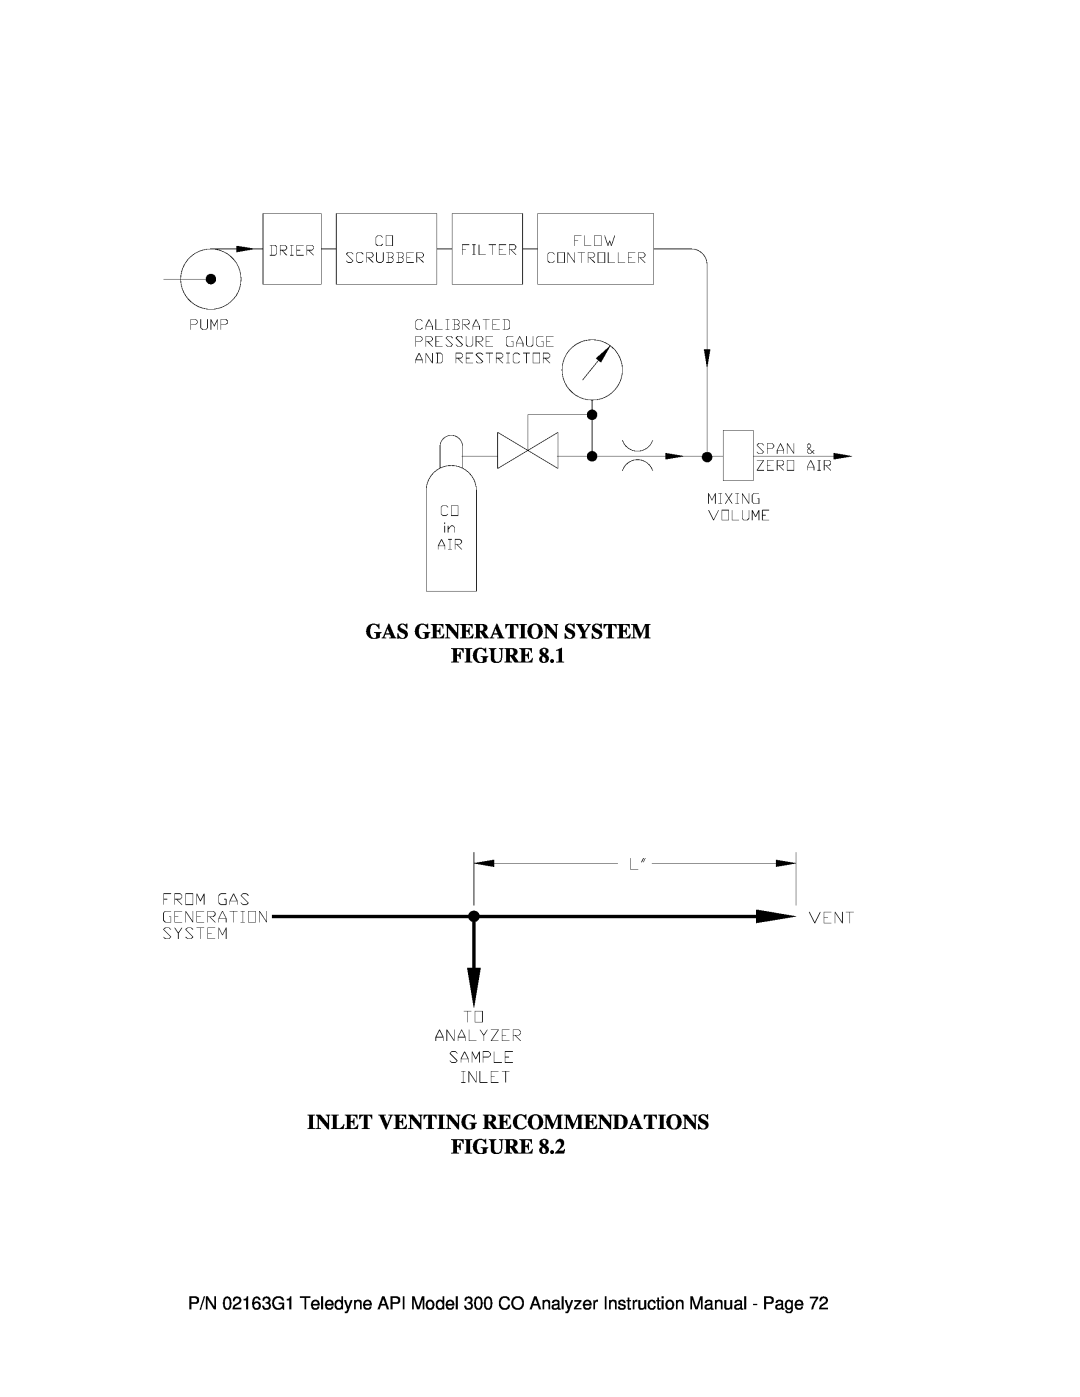 Teledyne 300 instruction manual Gas Generation System Figure, Inlet Venting Recommendations Figure 